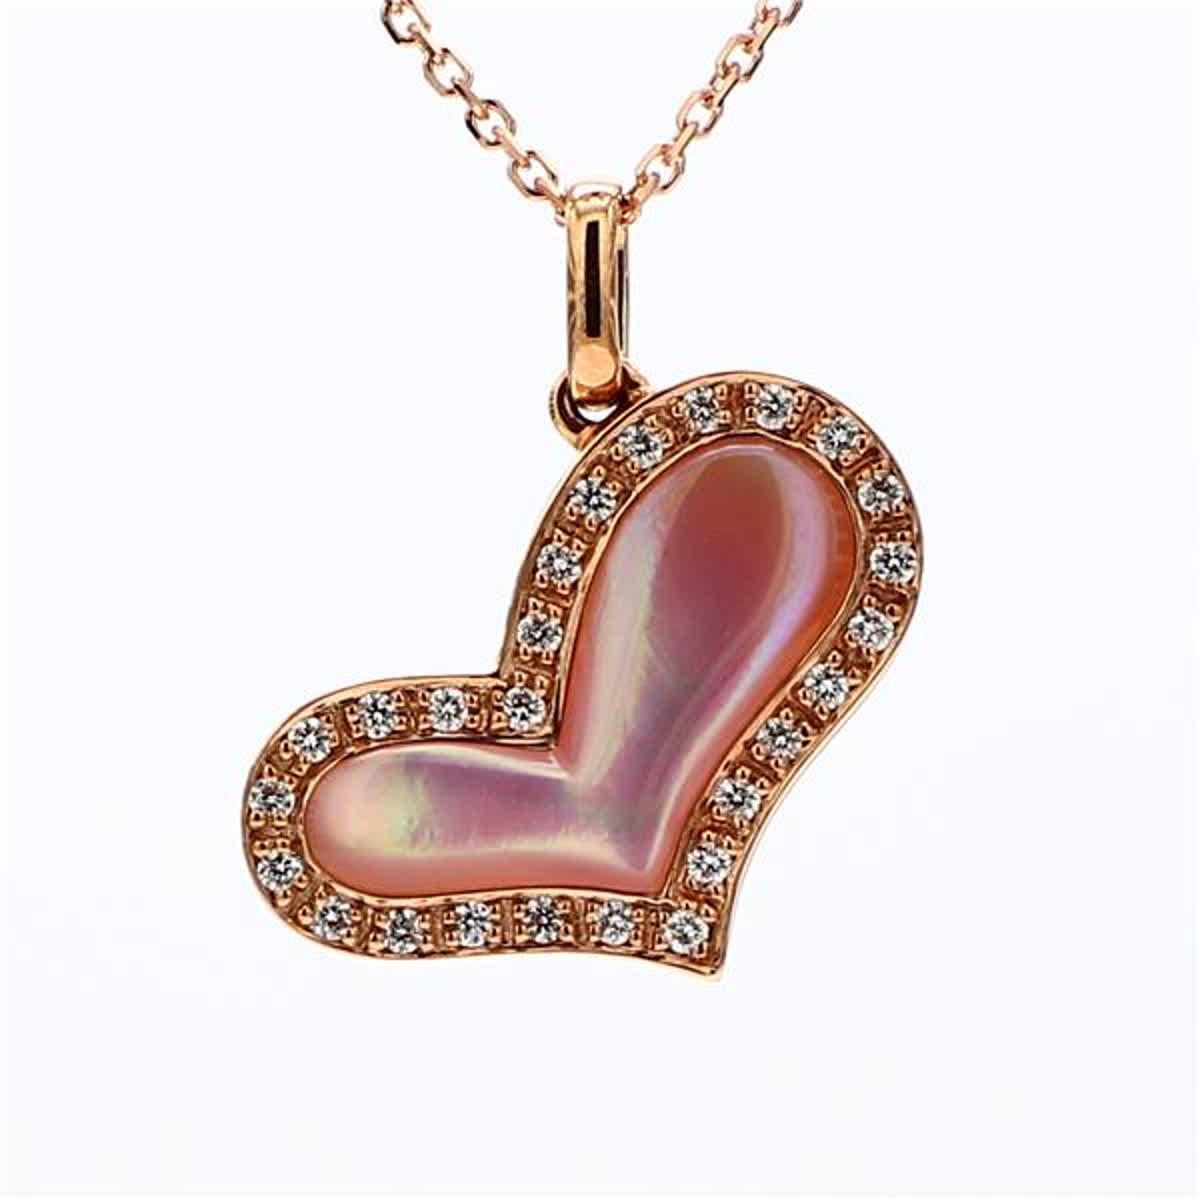 RareGemWorld's classic pink shell and pearl pendant. Mounted in a beautiful 18K Rose Gold setting with a distorted heart shape natural pear and a distorted heart shape natural pink shell. The center pieces are complimented by natural round white